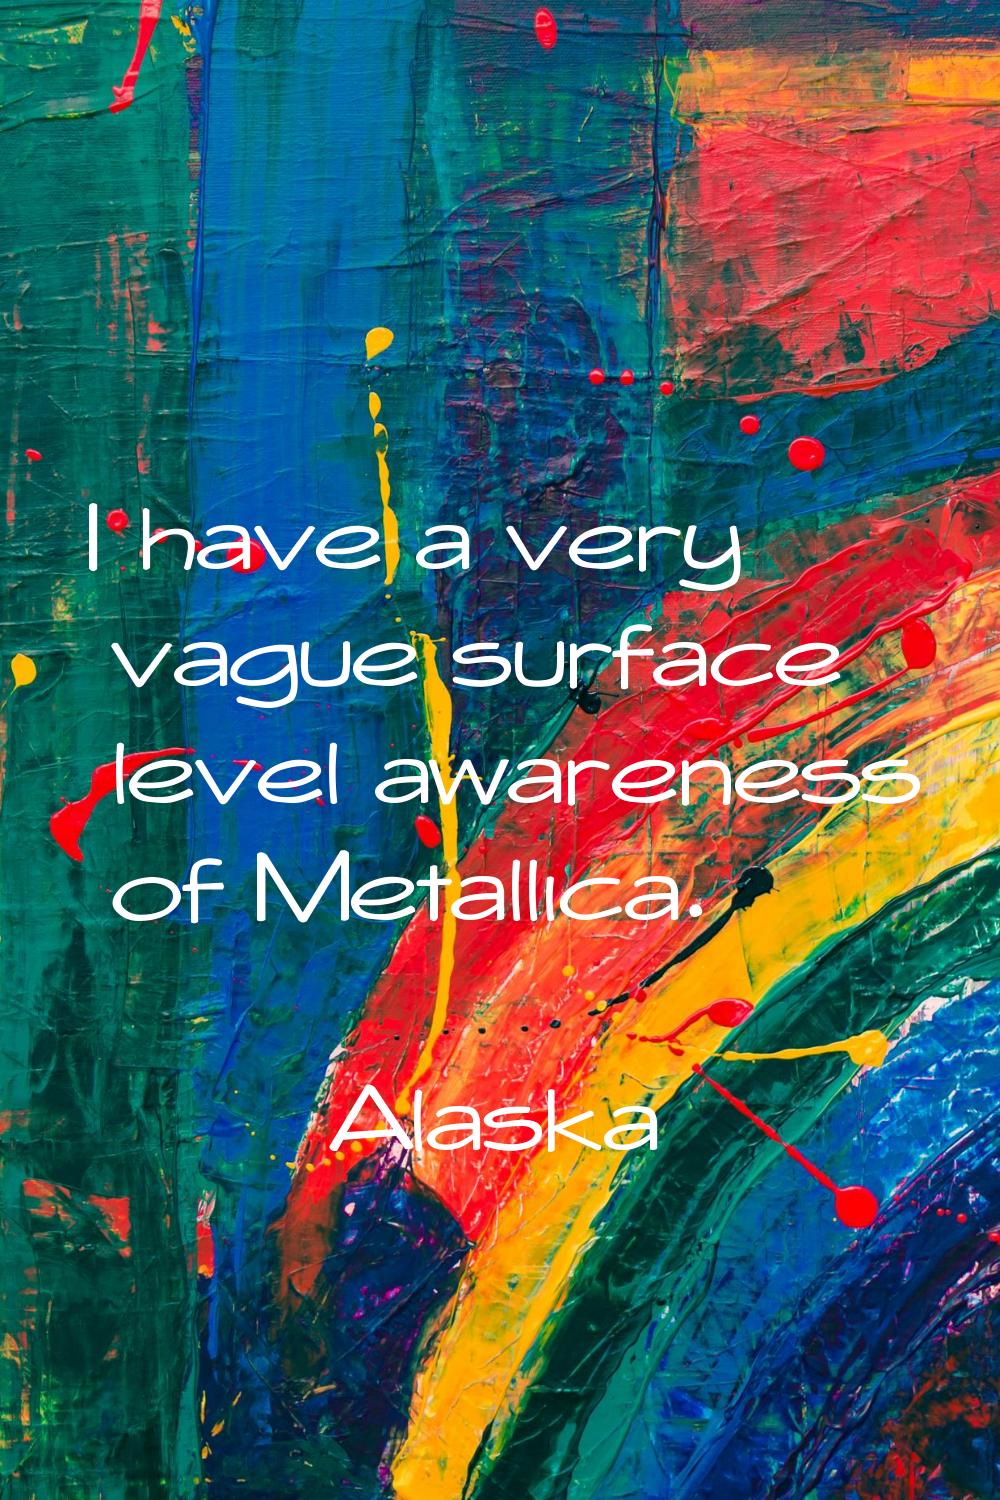 I have a very vague surface level awareness of Metallica.